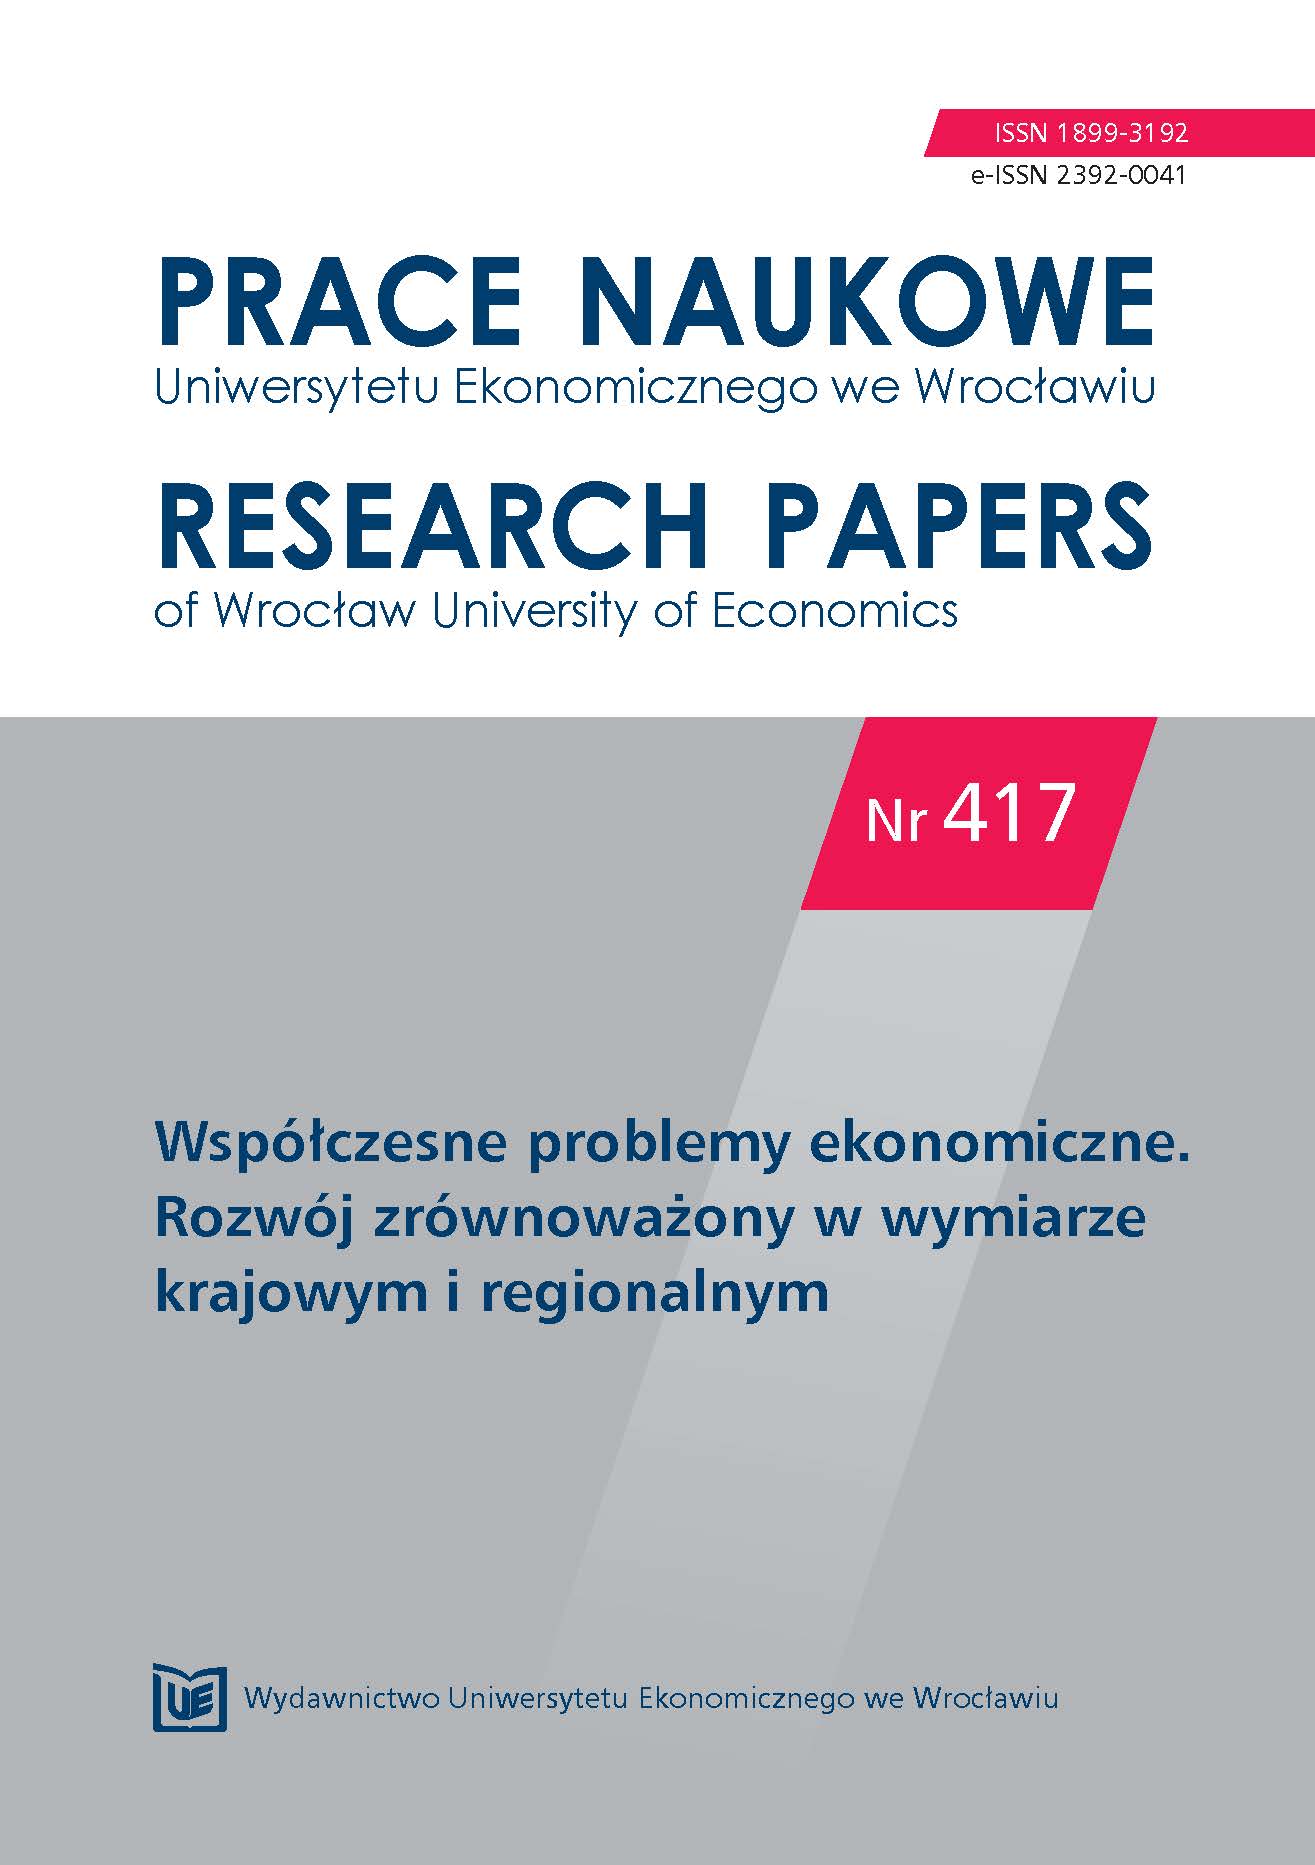 Foreign trade in special economic zones in Poland in 2012 Cover Image